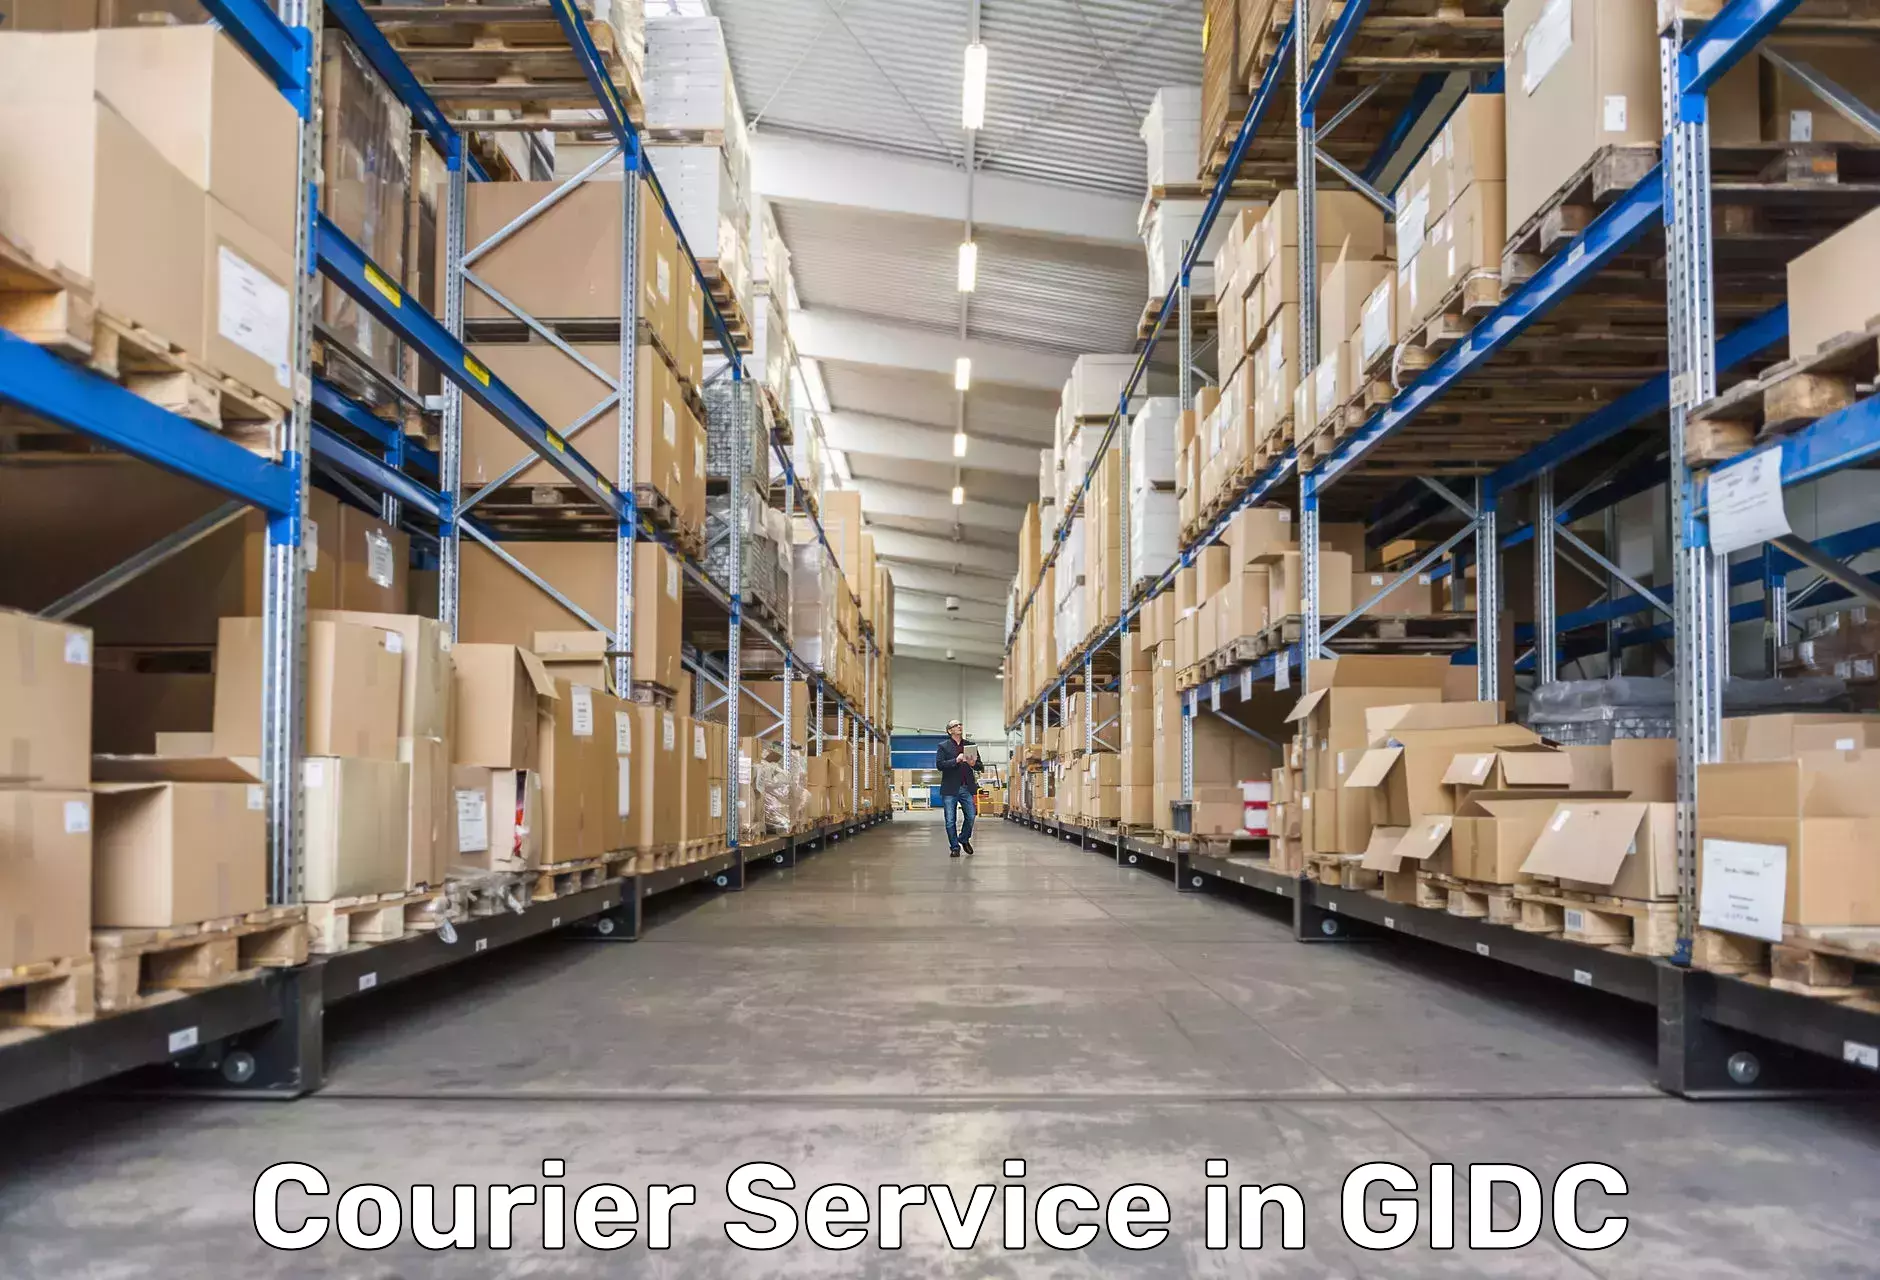 Express delivery capabilities in GIDC